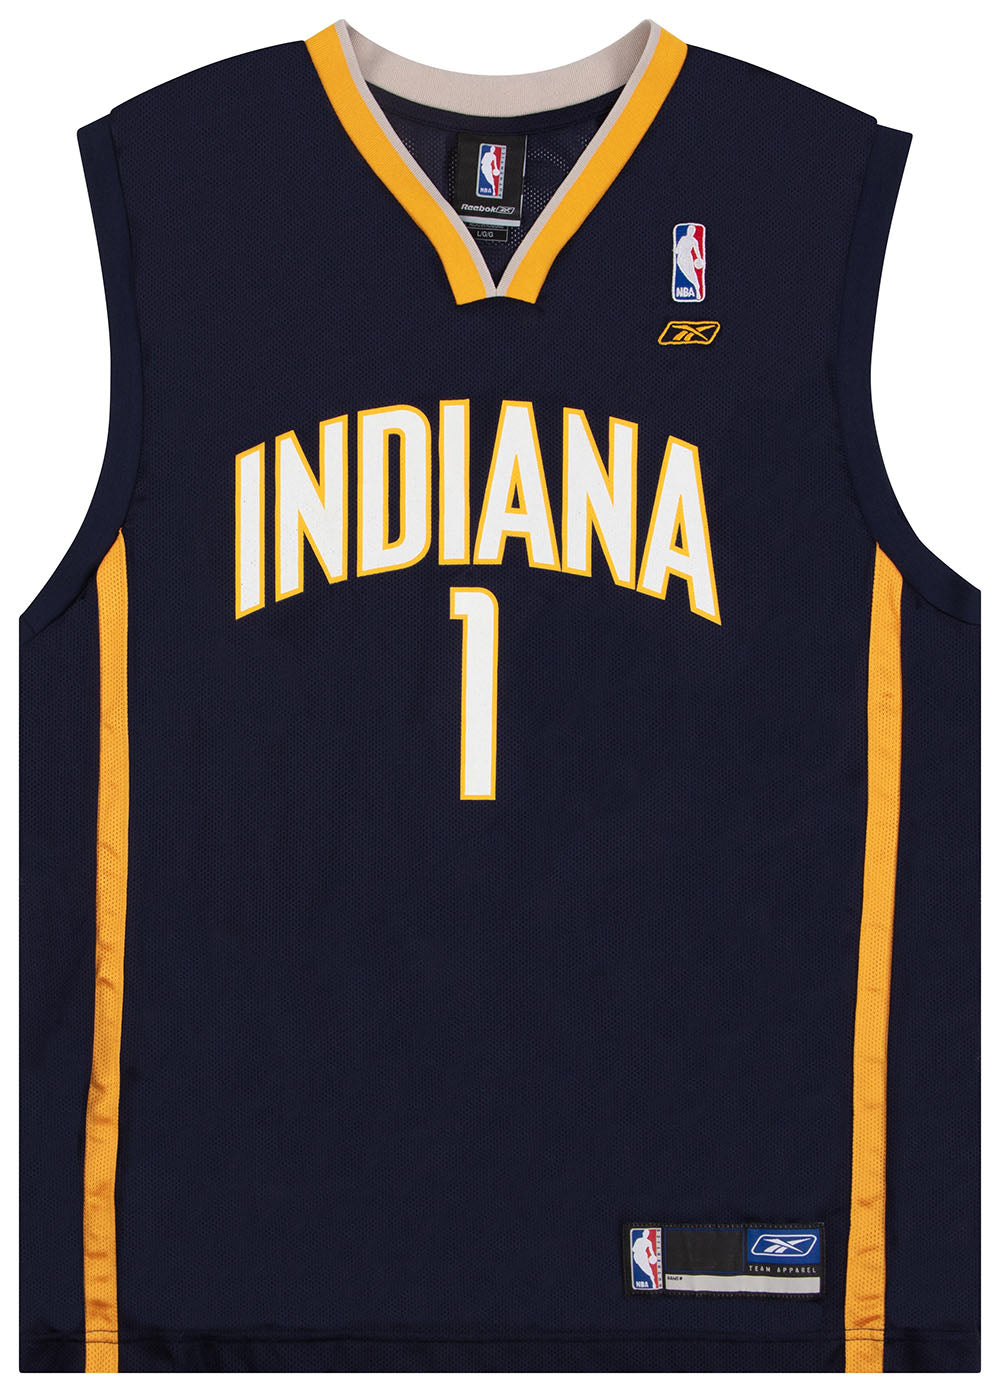 2005-06 AUTHENTIC INDIANA PACERS WHITE #0 REEBOK JERSEY (HOME) L